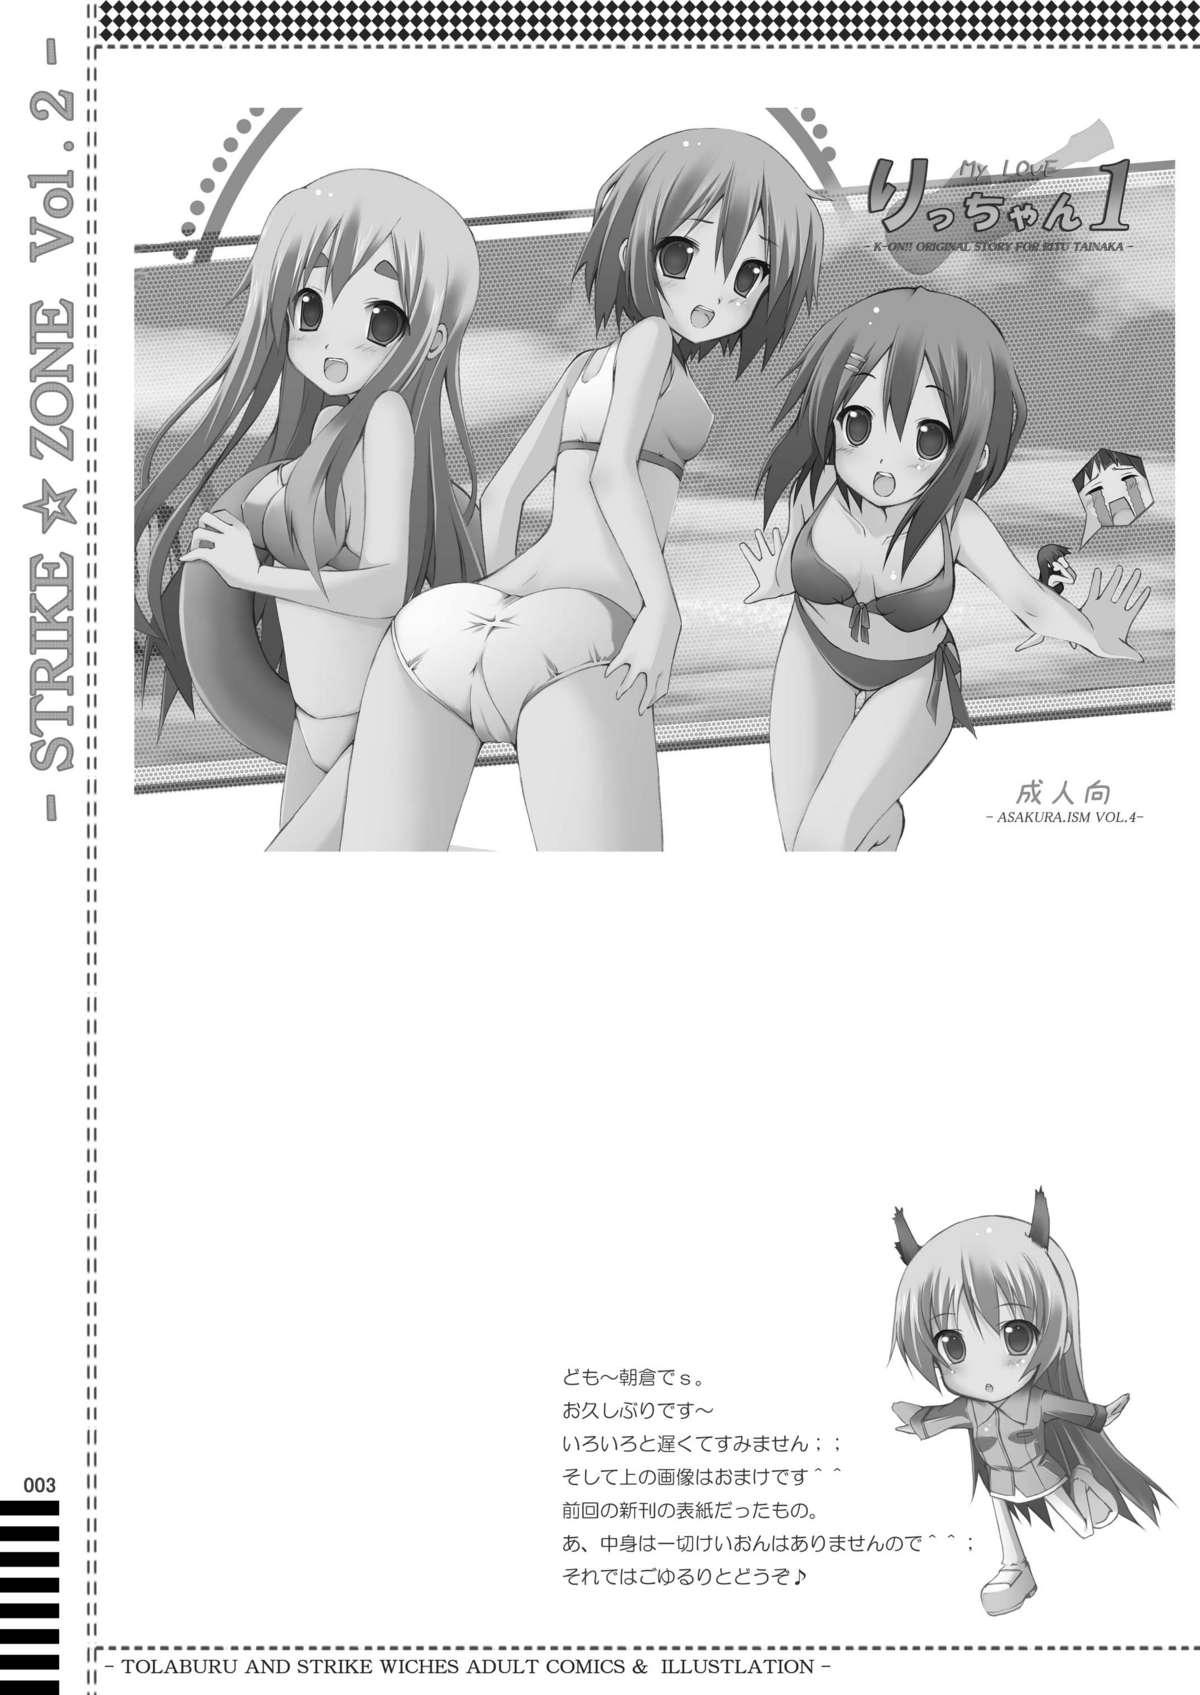 Awesome STRIKE☆ZONE 2 - Strike witches Fake - Picture 2